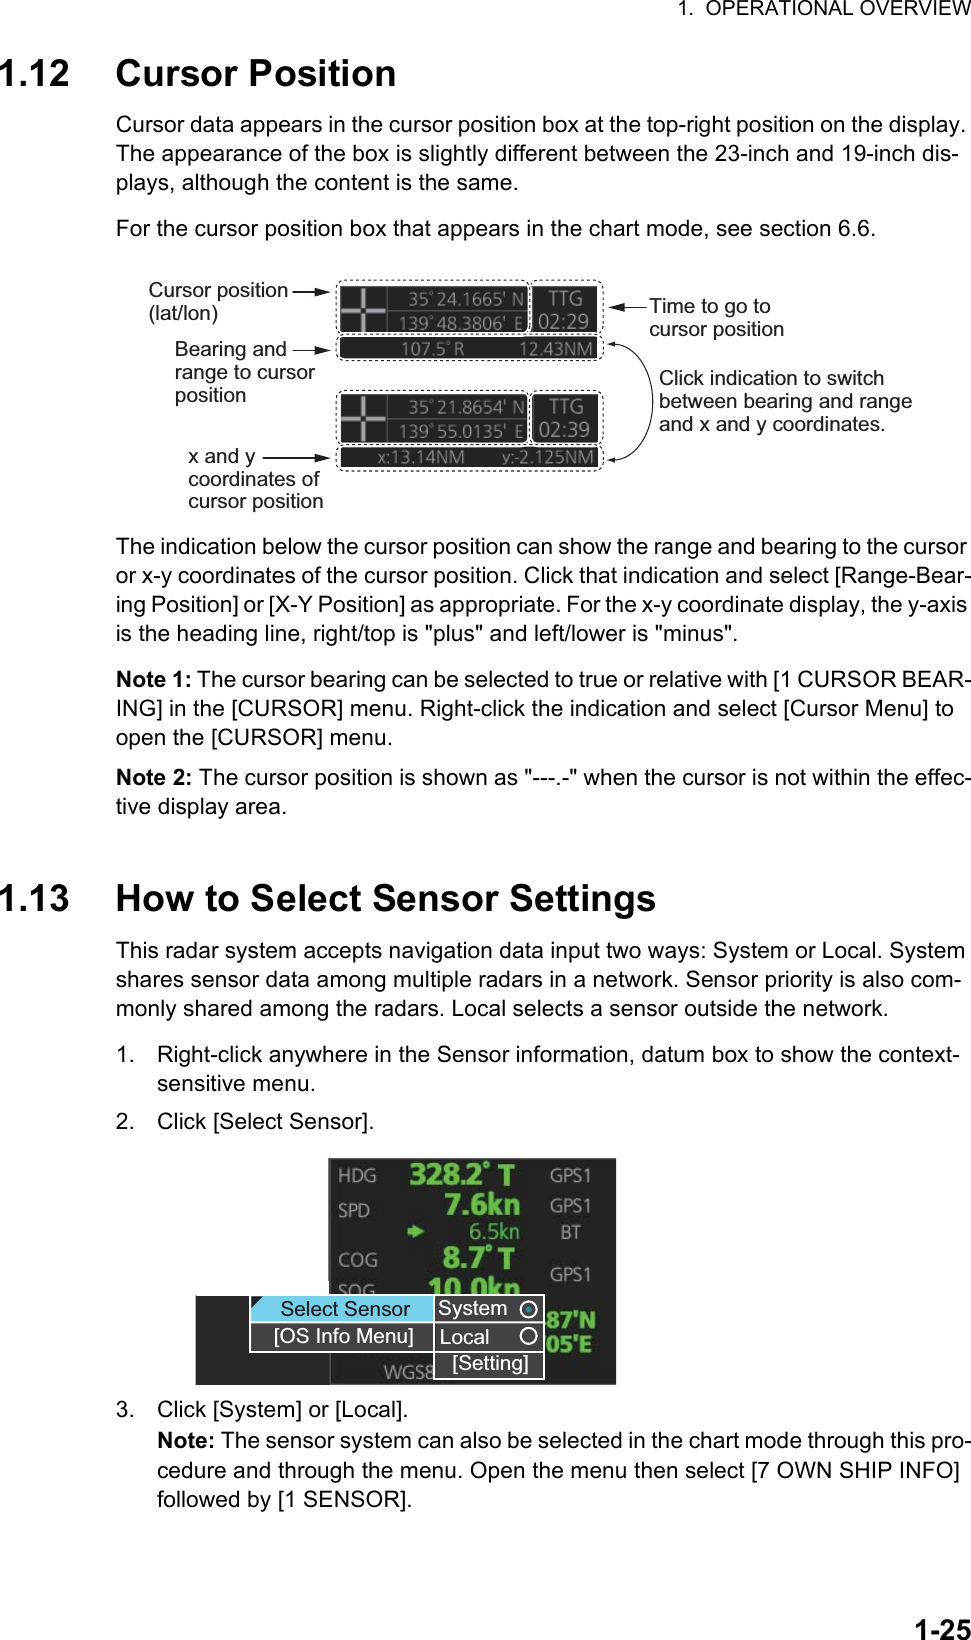 1.  OPERATIONAL OVERVIEW1-251.12 Cursor PositionCursor data appears in the cursor position box at the top-right position on the display. The appearance of the box is slightly different between the 23-inch and 19-inch dis-plays, although the content is the same.For the cursor position box that appears in the chart mode, see section 6.6.The indication below the cursor position can show the range and bearing to the cursor or x-y coordinates of the cursor position. Click that indication and select [Range-Bear-ing Position] or [X-Y Position] as appropriate. For the x-y coordinate display, the y-axis is the heading line, right/top is &quot;plus&quot; and left/lower is &quot;minus&quot;.Note 1: The cursor bearing can be selected to true or relative with [1 CURSOR BEAR-ING] in the [CURSOR] menu. Right-click the indication and select [Cursor Menu] to open the [CURSOR] menu.Note 2: The cursor position is shown as &quot;---.-&quot; when the cursor is not within the effec-tive display area.1.13 How to Select Sensor SettingsThis radar system accepts navigation data input two ways: System or Local. System shares sensor data among multiple radars in a network. Sensor priority is also com-monly shared among the radars. Local selects a sensor outside the network.1. Right-click anywhere in the Sensor information, datum box to show the context-sensitive menu.2. Click [Select Sensor].3. Click [System] or [Local].Note: The sensor system can also be selected in the chart mode through this pro-cedure and through the menu. Open the menu then select [7 OWN SHIP INFO] followed by [1 SENSOR].Cursor position (lat/lon)Bearing and range to cursor positionTime to go to cursor positionx and y coordinates of cursor positionClick indication to switch between bearing and range and x and y coordinates.SystemLocal[Setting]SystemLocalSelect Sensor[OS Info Menu][Setting]